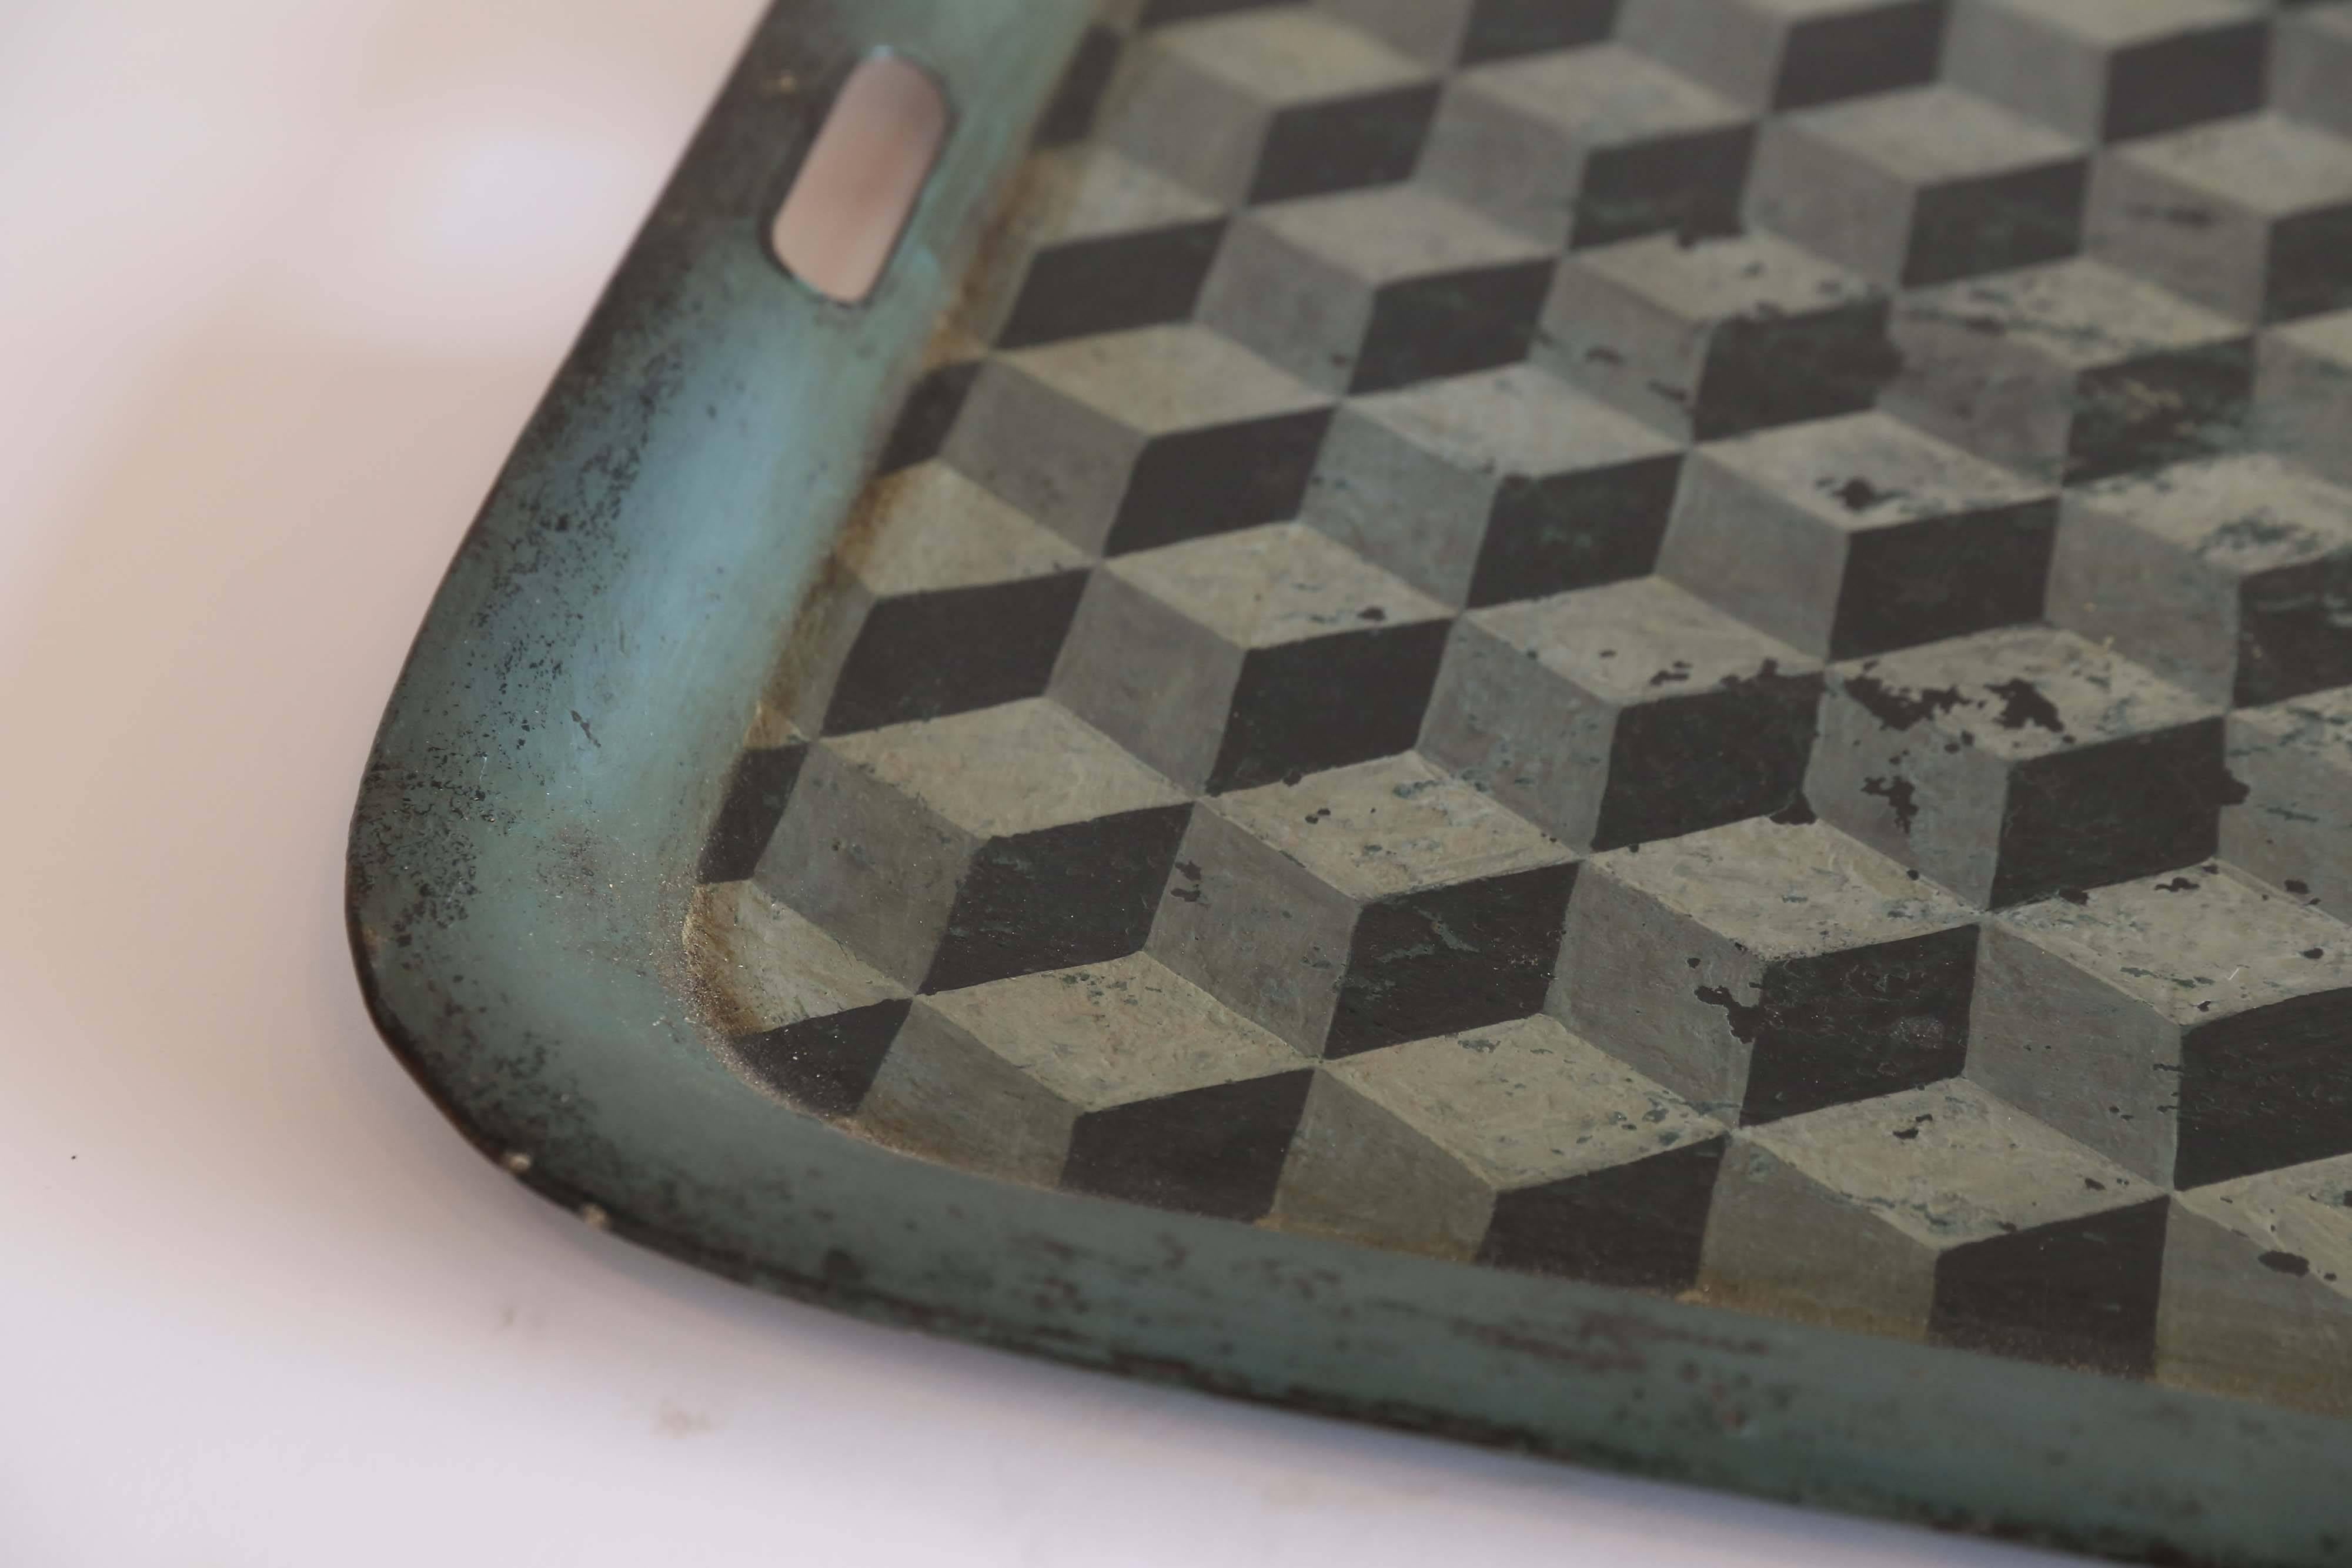 A metal tray of considerable size from 18th century, France. In shades of green with black, the tray is hand-painted in the Tumbling Block pattern. The wear on the piece minimal for it's age. Charming with a high touch factor.